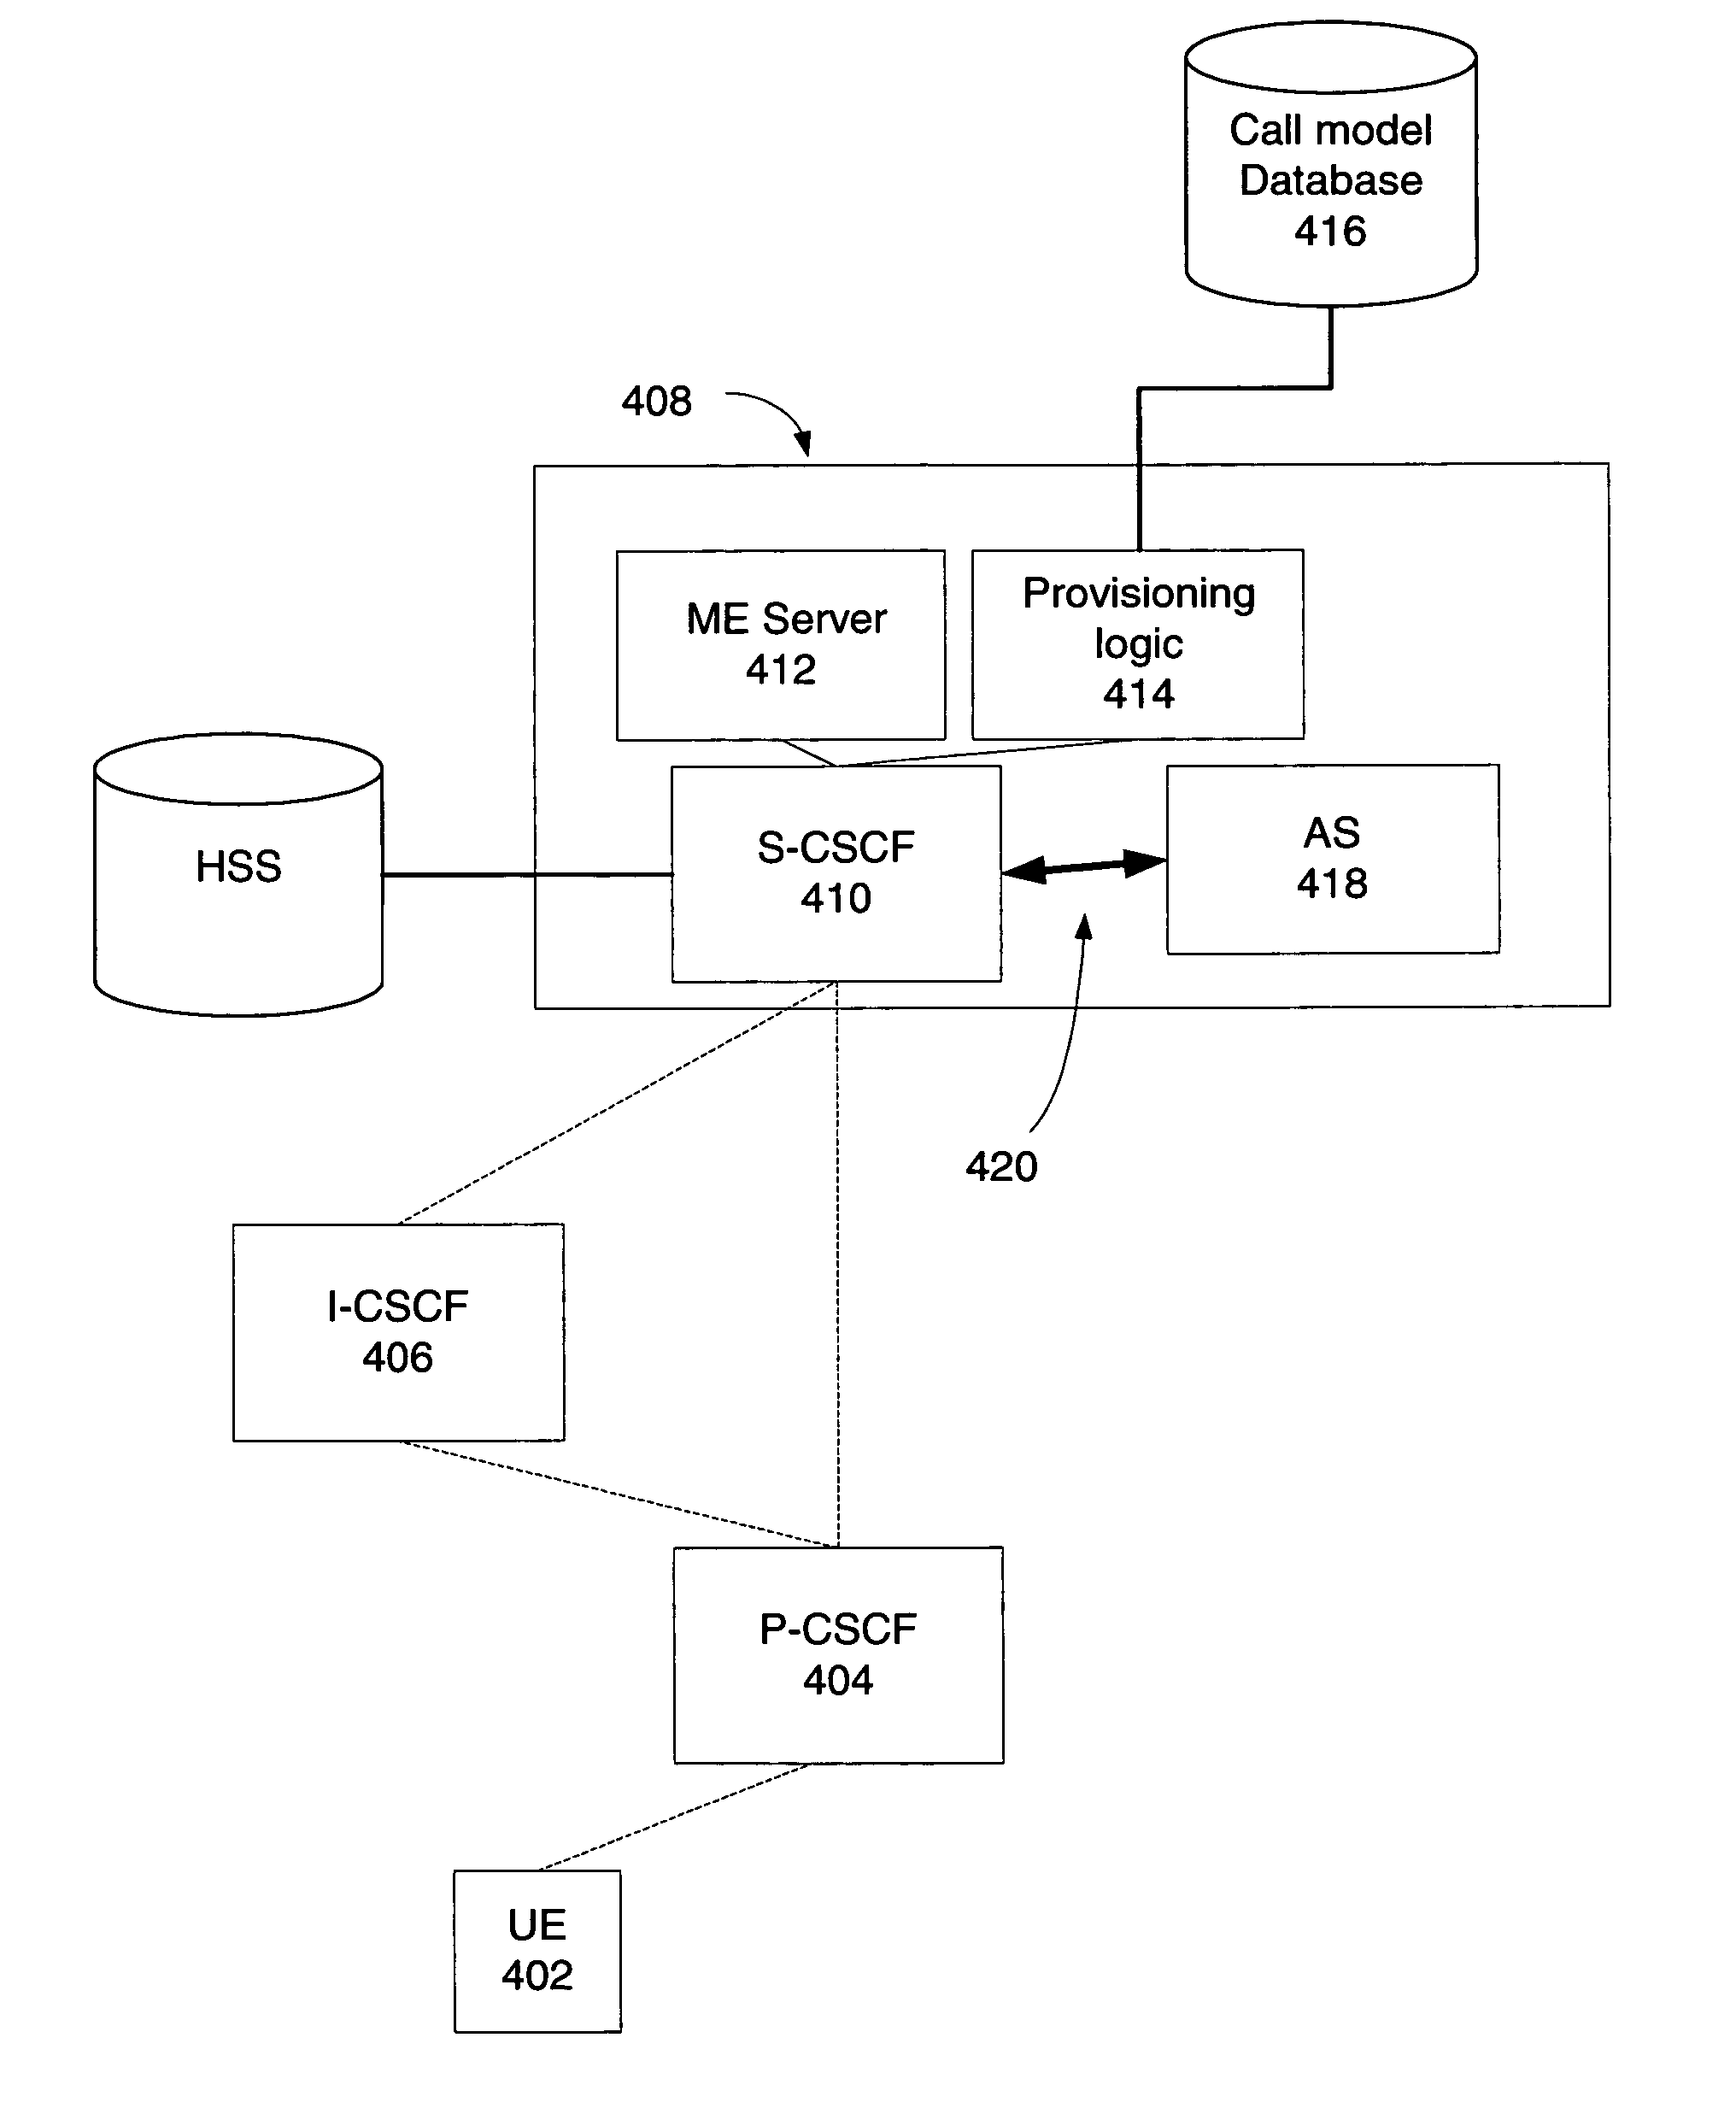 Method and system for provisioning IMS networks with virtual service organizations having distinct service logic